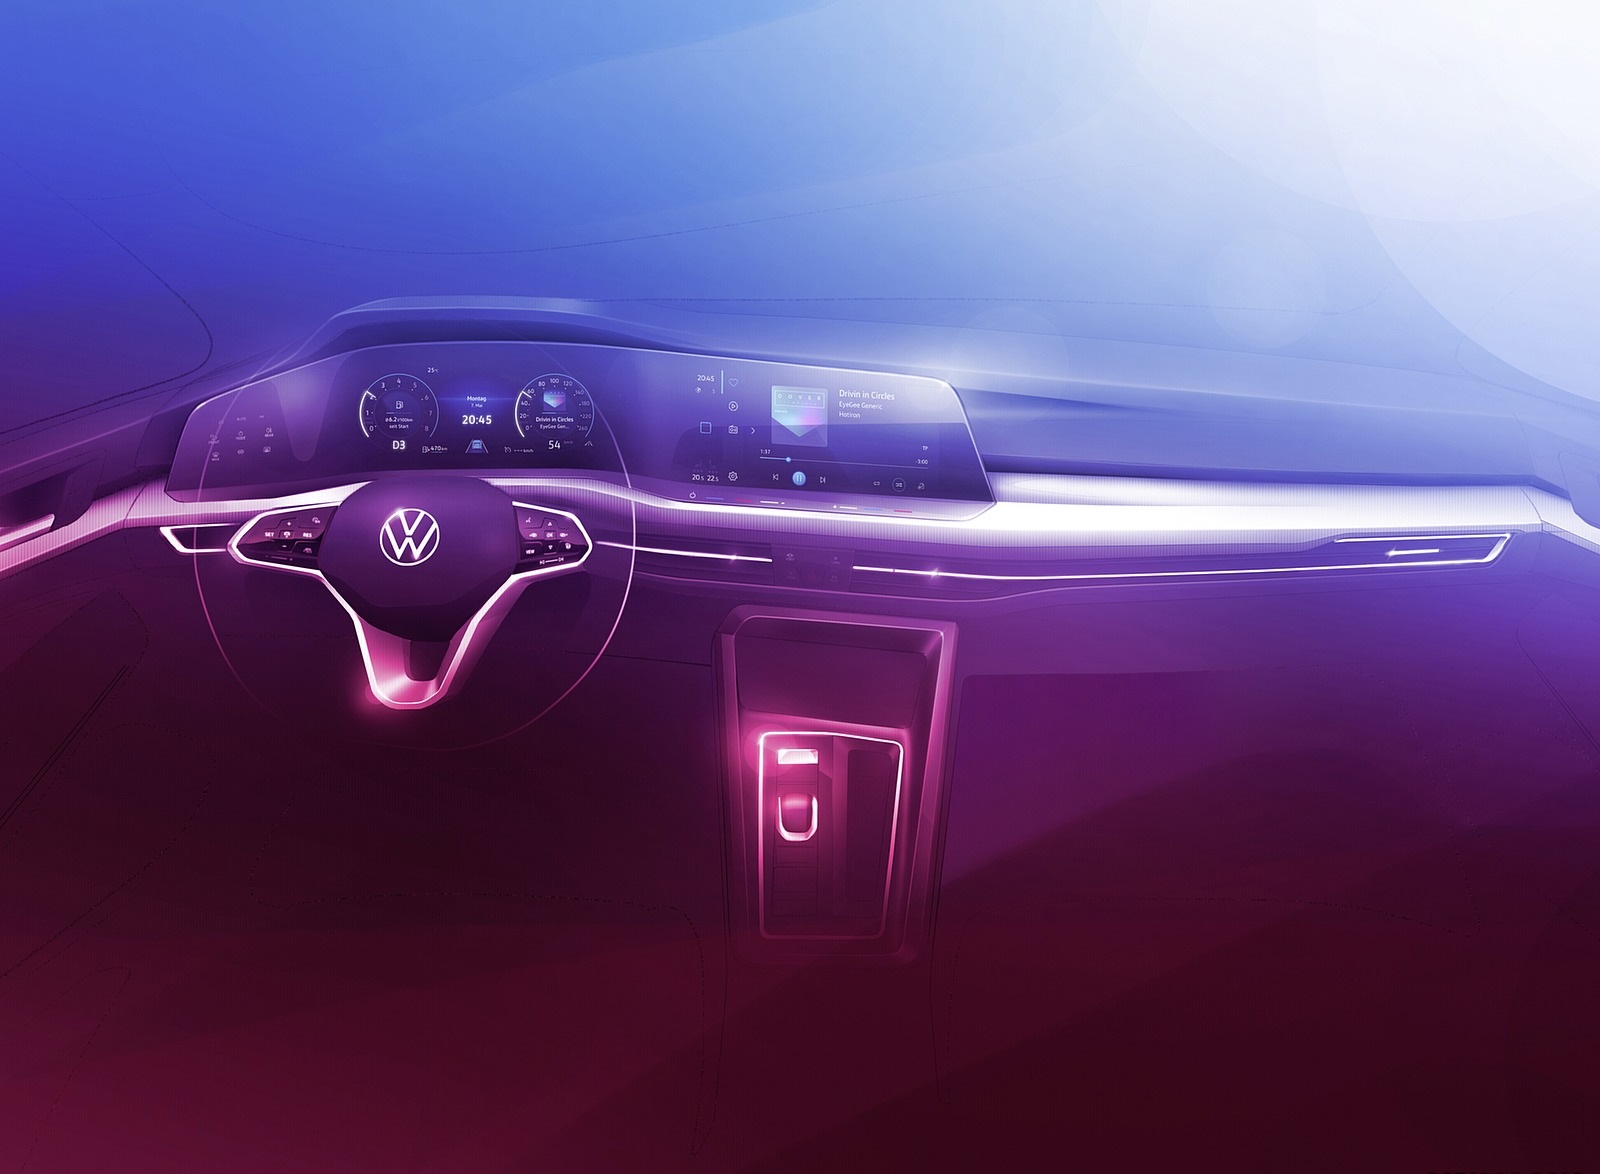 2020 Volkswagen Golf Mk8 and Previous Generations Design Sketch Wallpapers #77 of 81